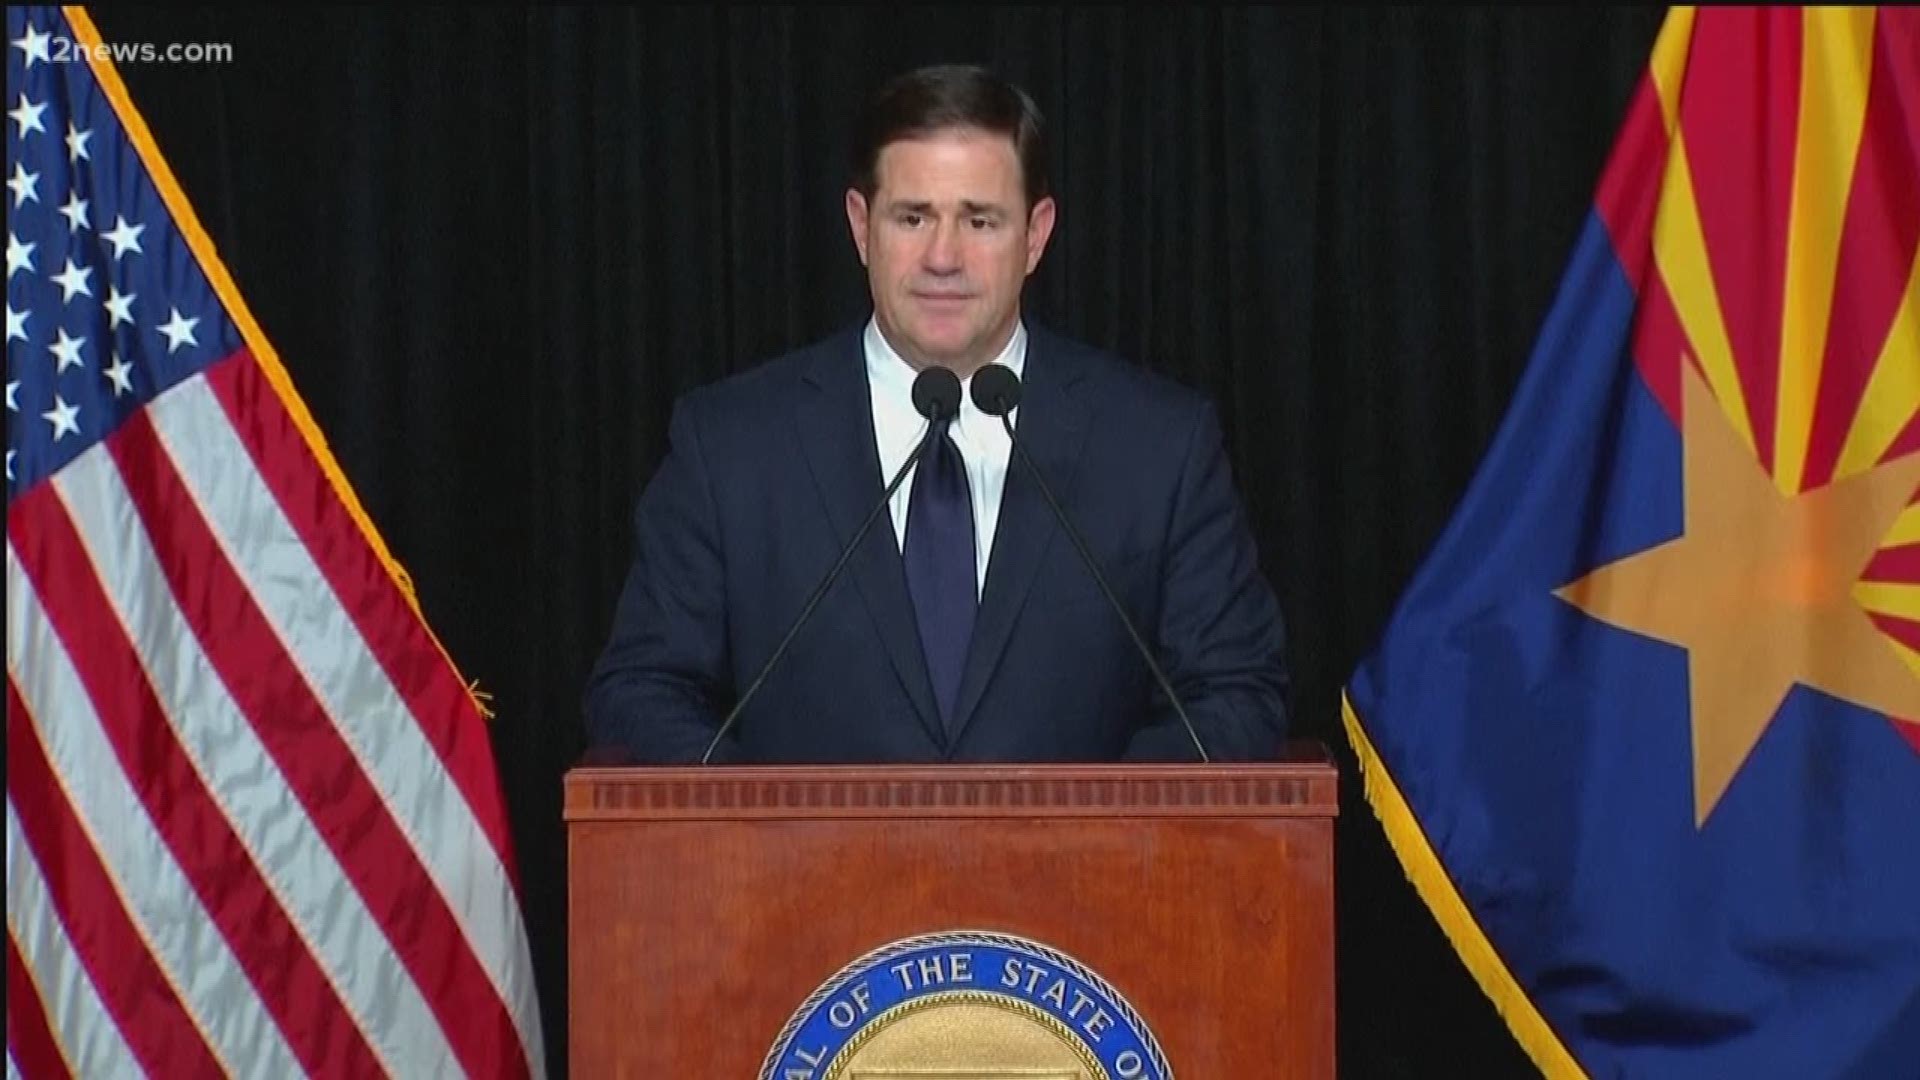 Governor Doug Ducey speaks to how John McCain lived his life in spirit and service, and as a proud Arizonan. 